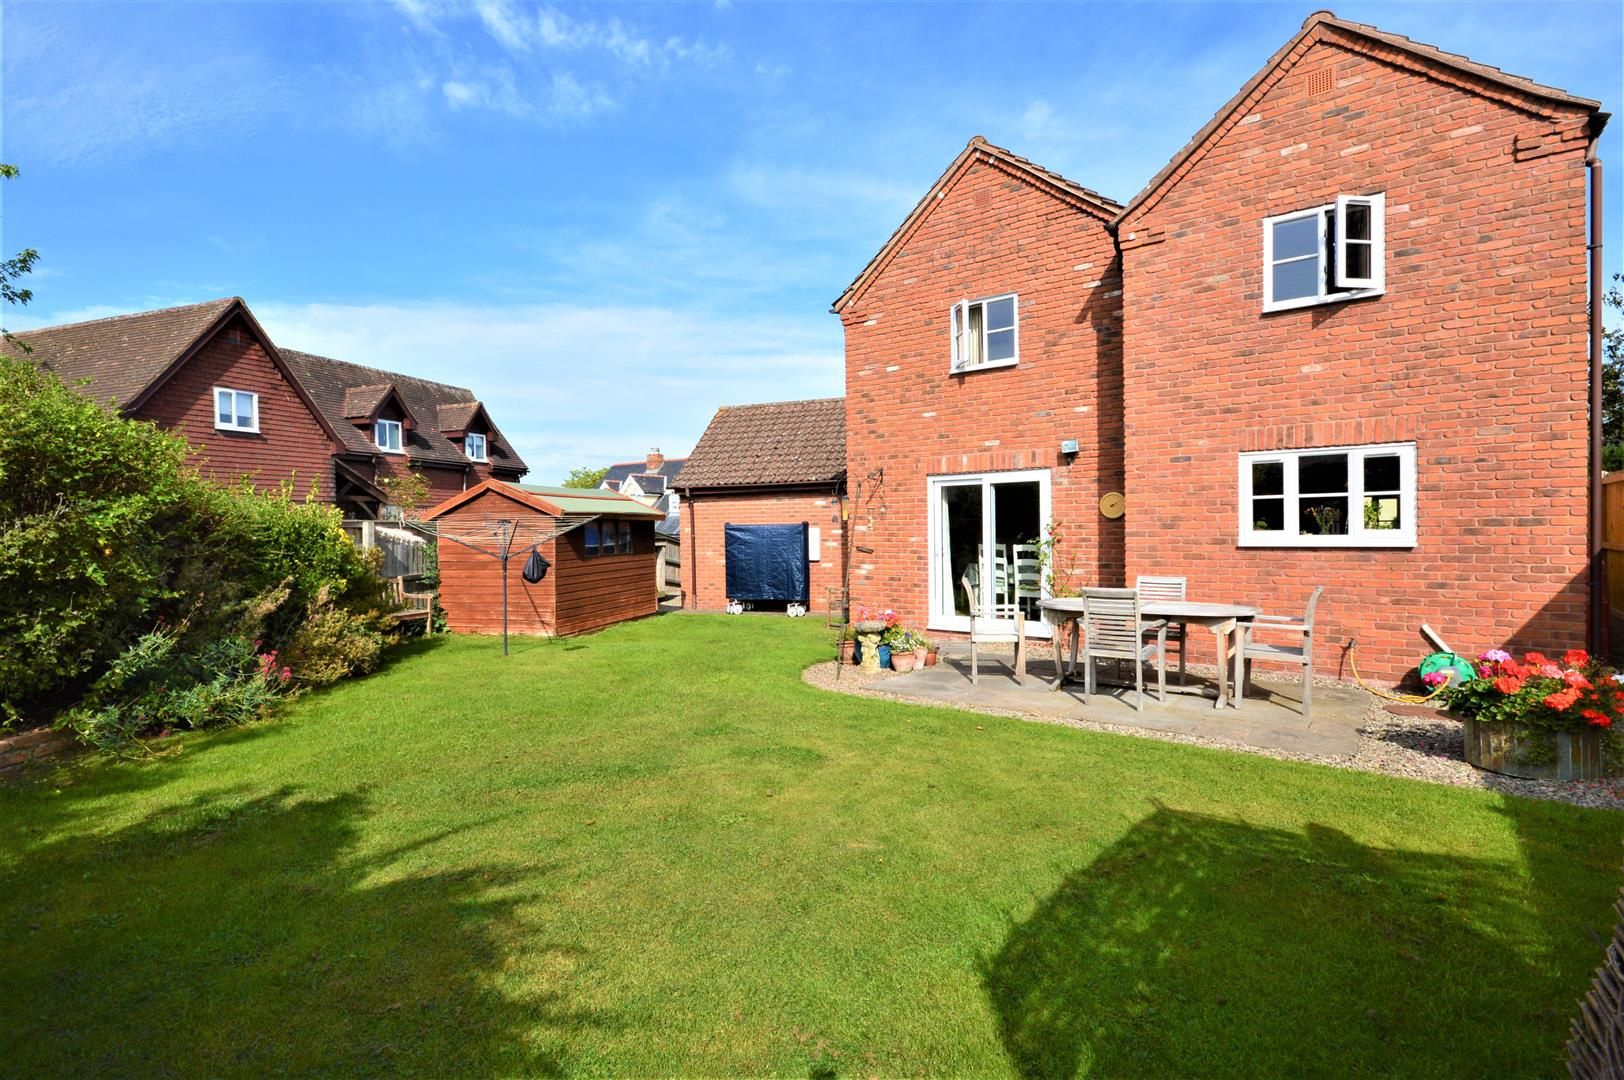 4 bed detached for sale in Staunton-On-Wye 14